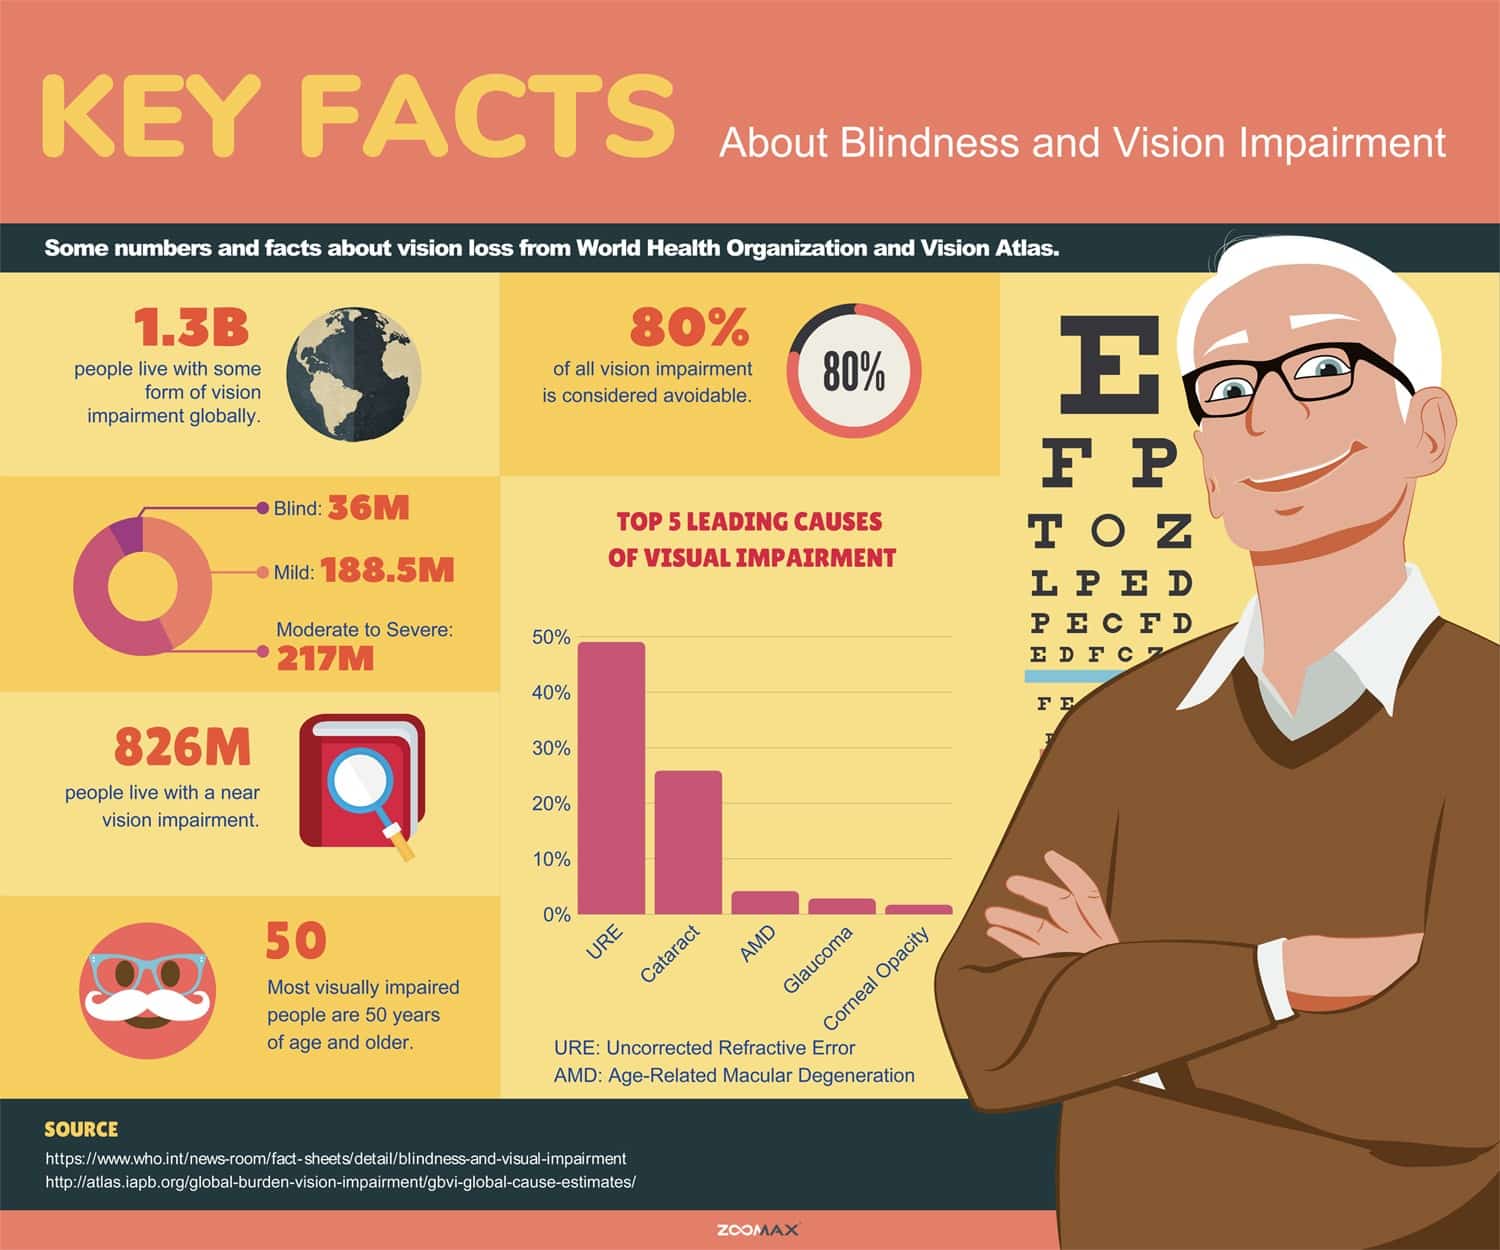 Key Facts About Blindness and Vision Impairment